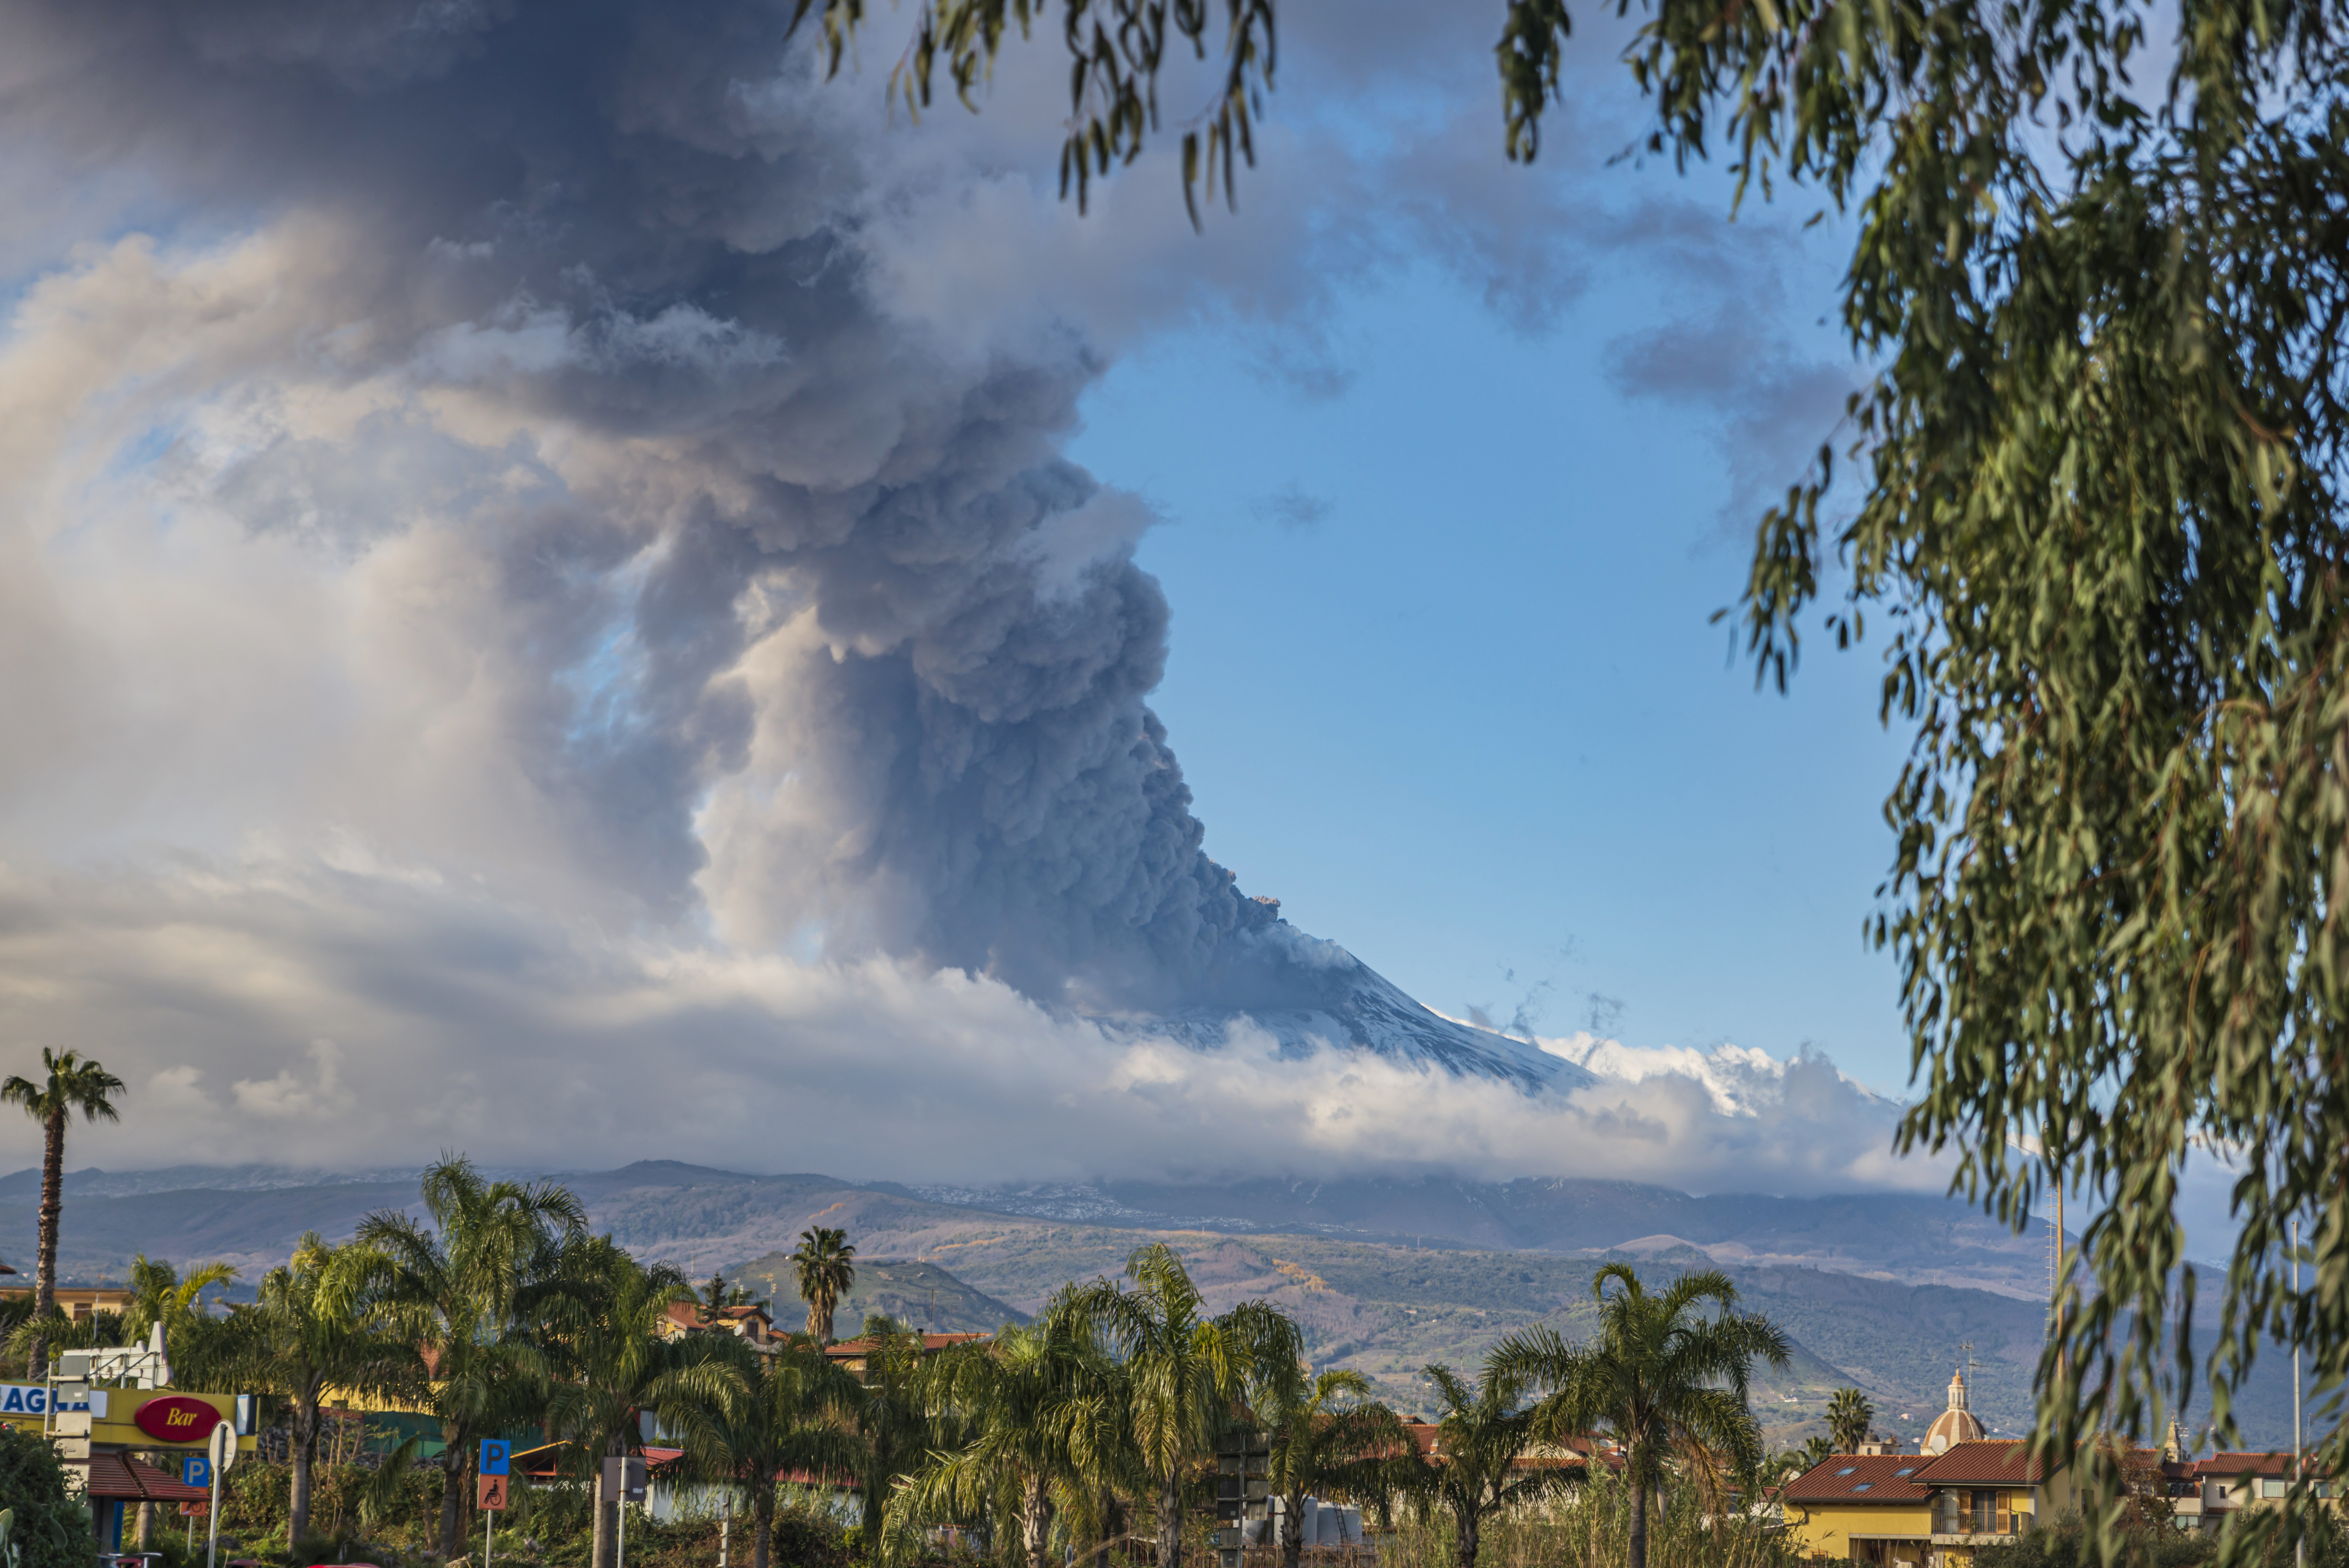 Mount Etna erupts viewed from Acireale near Catania, in southern Italy, on Tuesday, Dec. 14, 2021. (AP Photo/Salvatore Allegra)